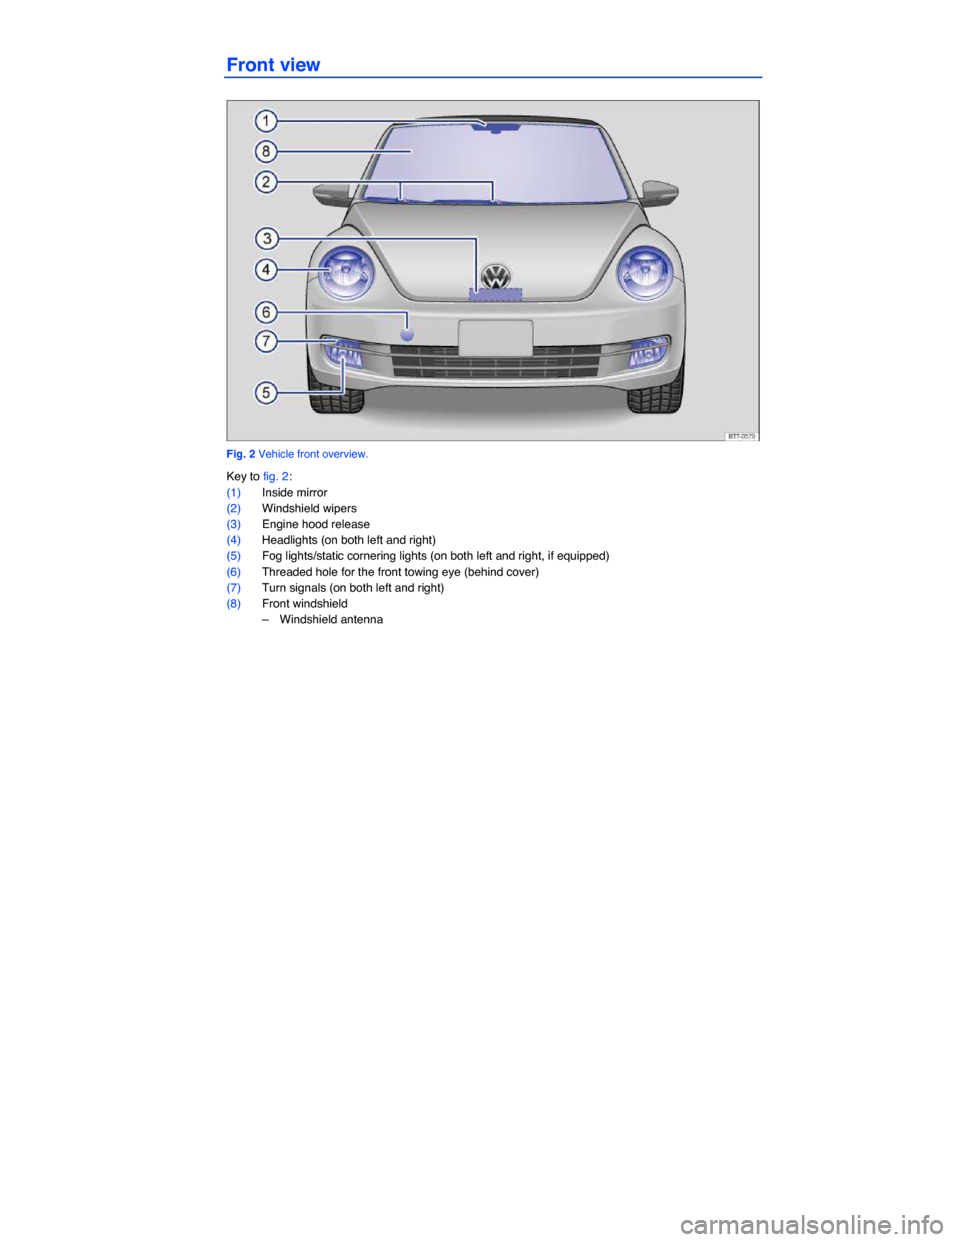 VOLKSWAGEN BEETLE CONVERTIBLE 2014 3.G Owners Manual  
Front view 
 
Fig. 2 Vehicle front overview. 
Key to fig. 2: 
(1) Inside mirror  
(2) Windshield wipers  
(3) Engine hood release  
(4) Headlights (on both left and right)  
(5) Fog lights/static co